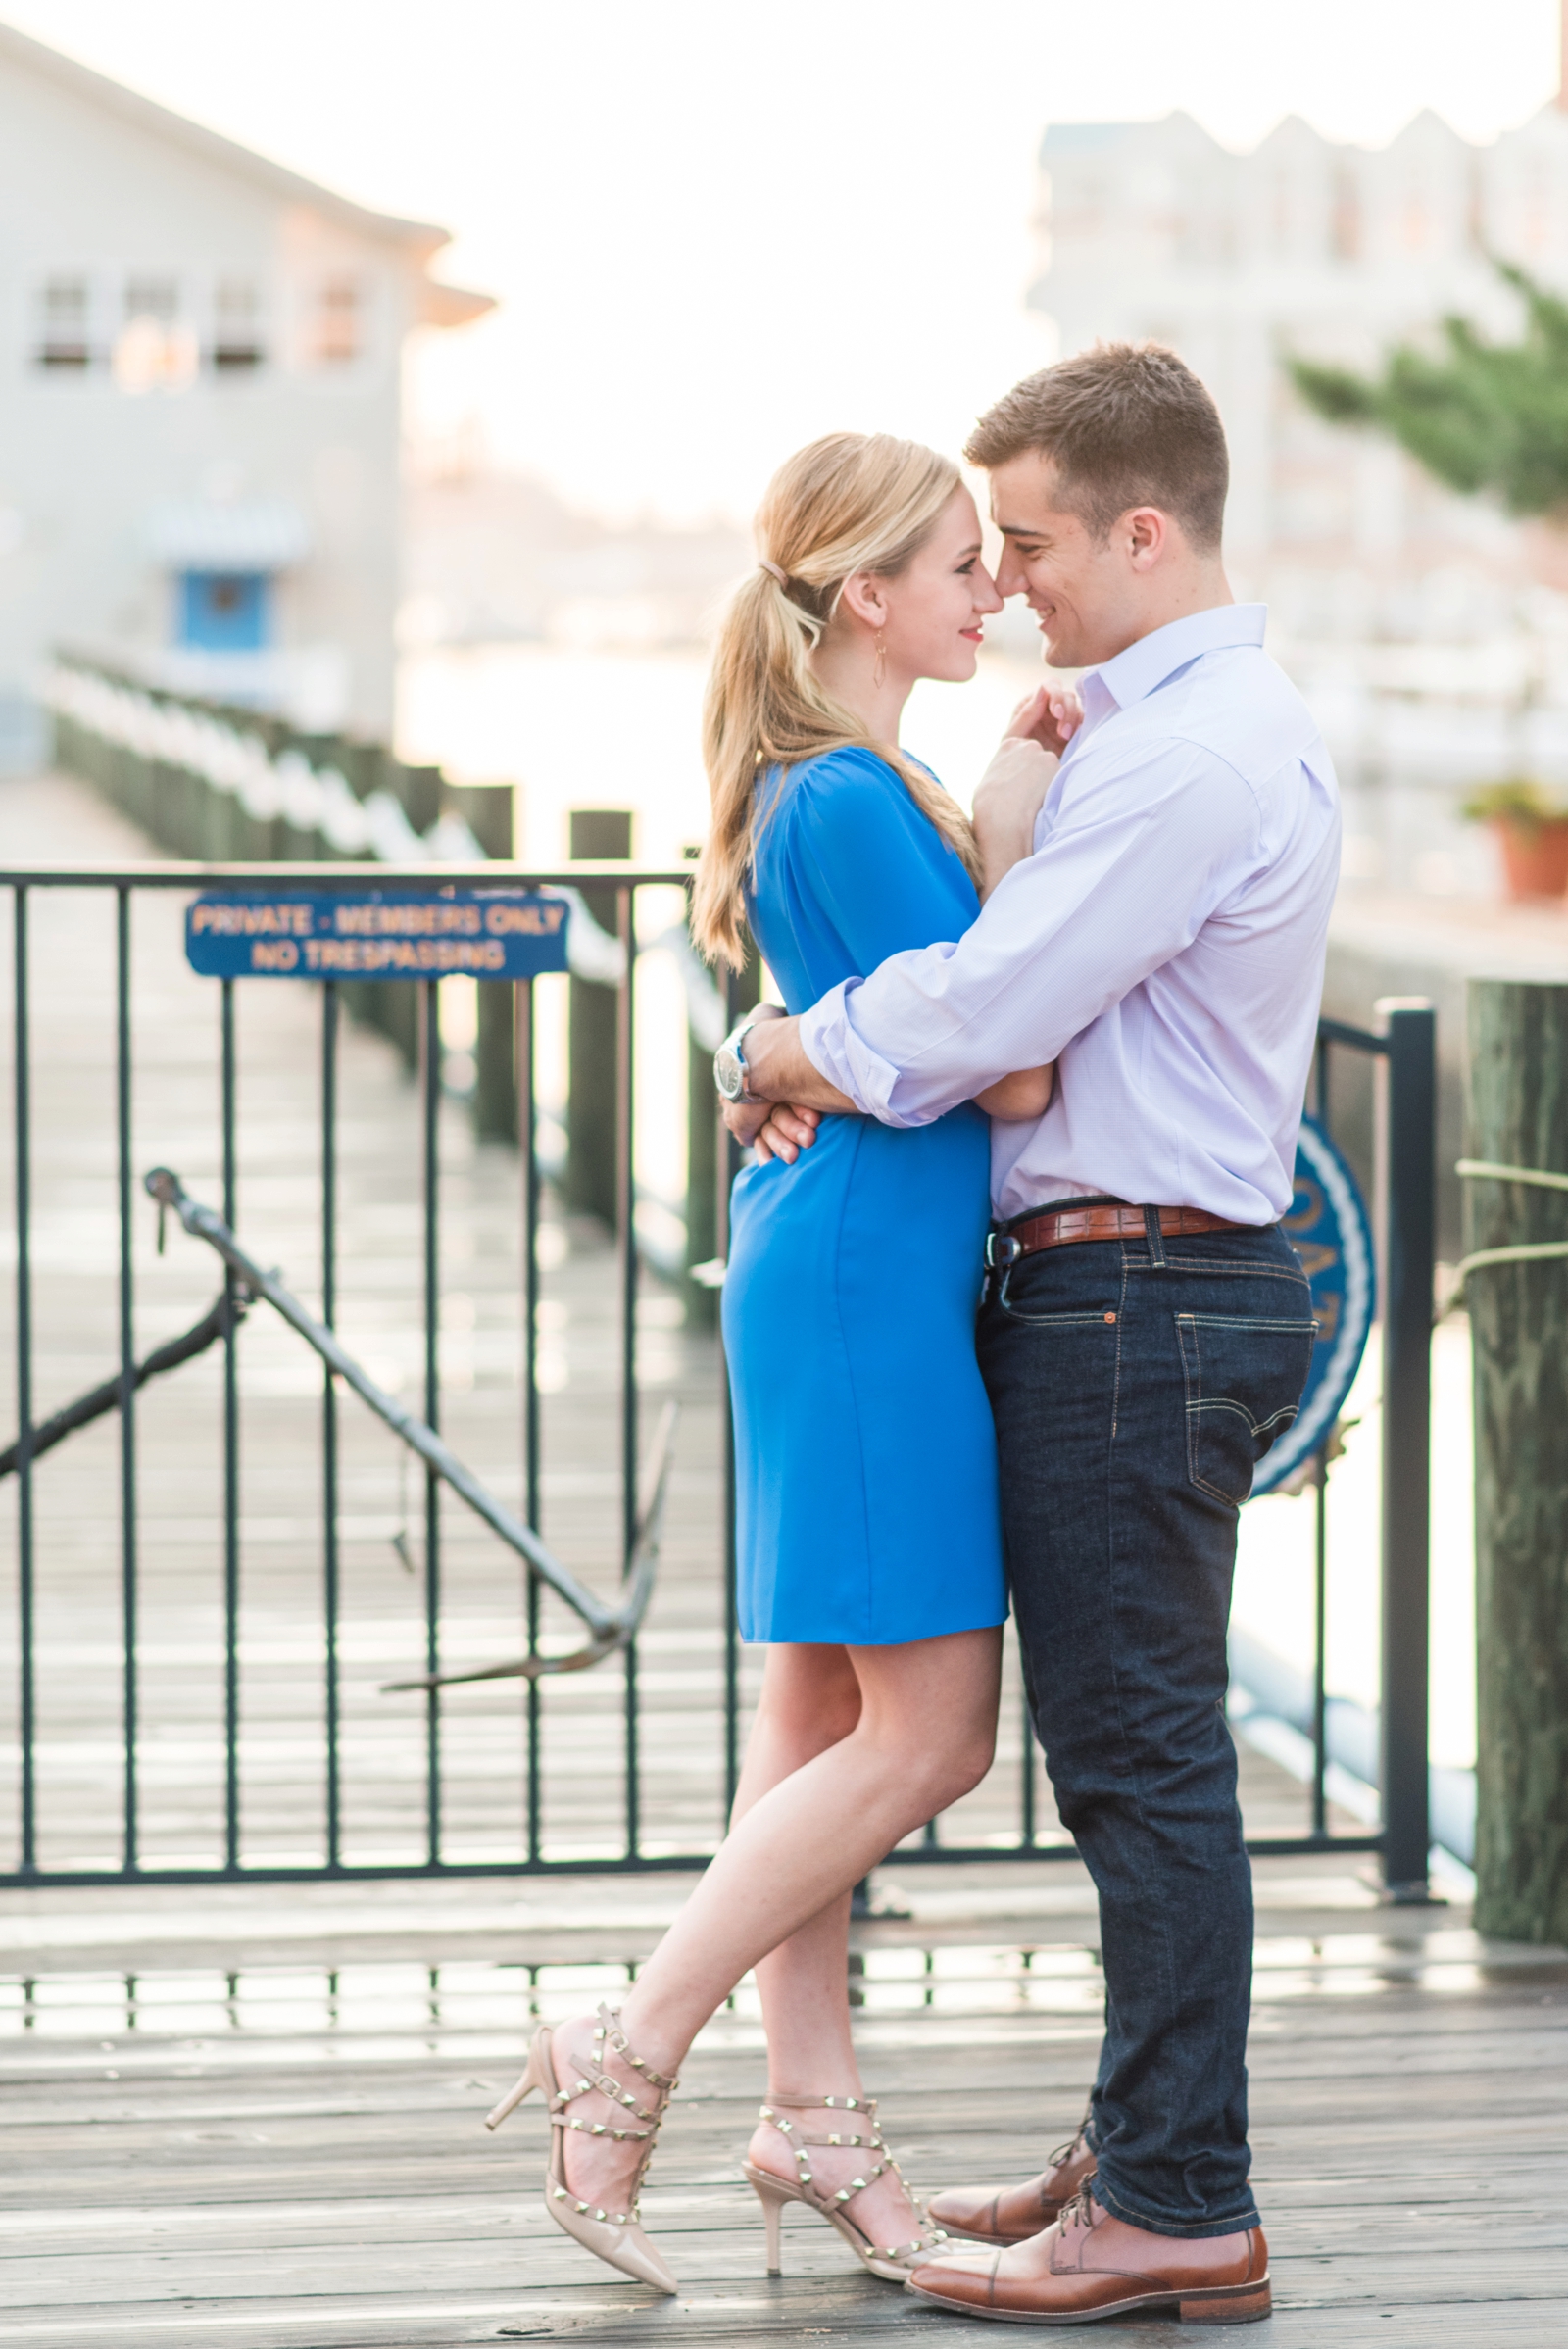 downtown norfolk freemason district engagement session pictures